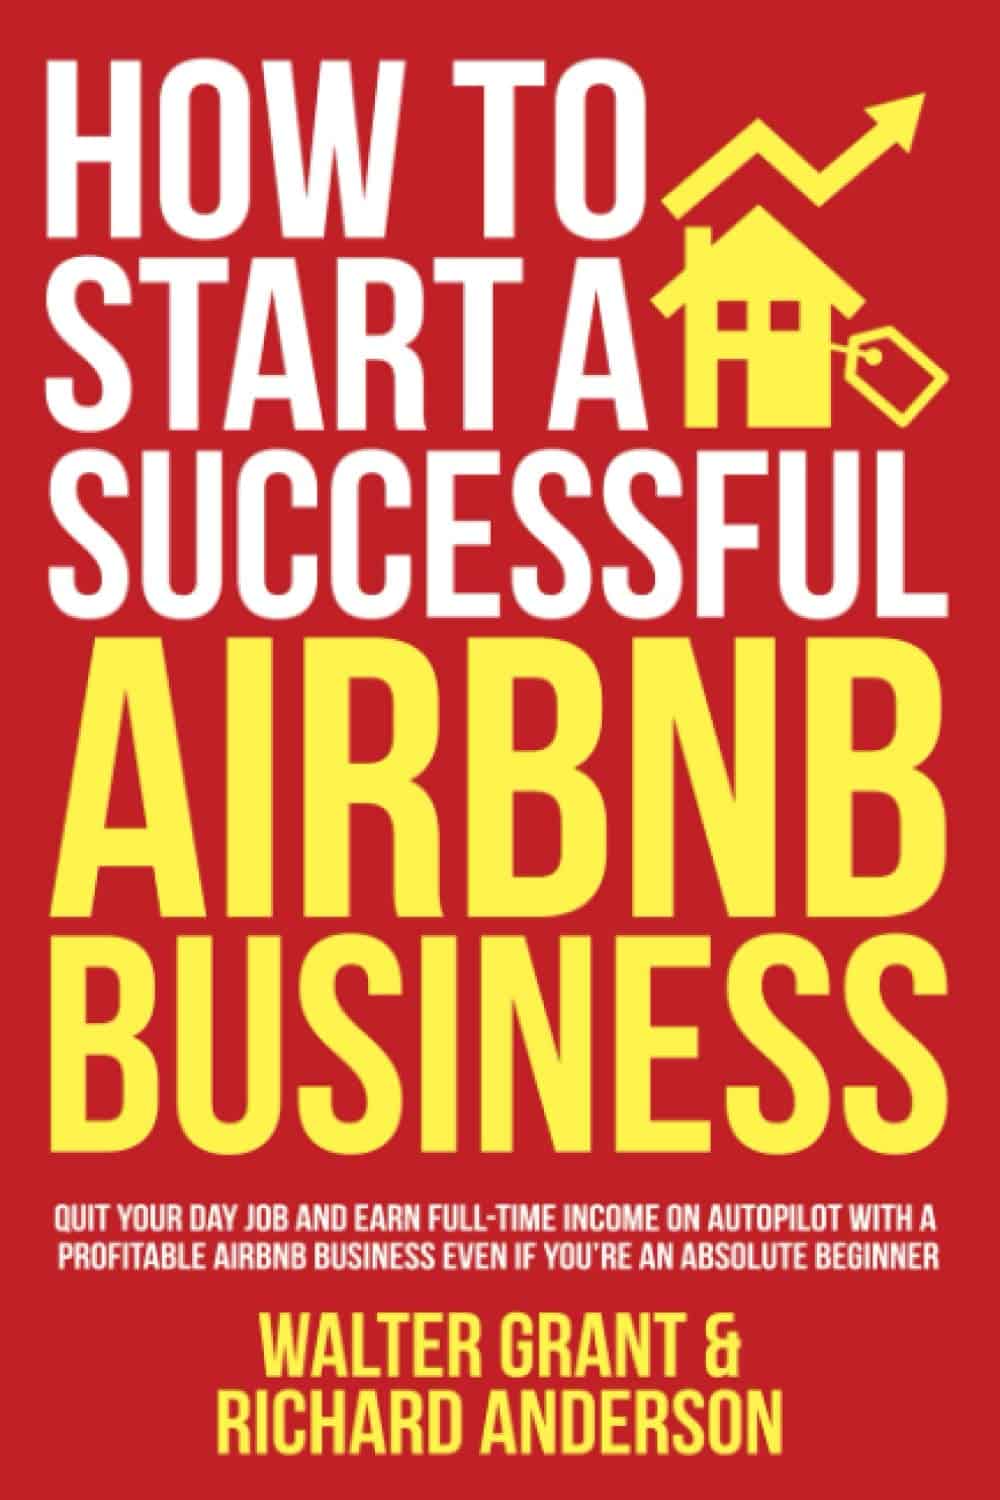 How to Start a Successful Airbnb Business by Walter Grant and Richard Anderson